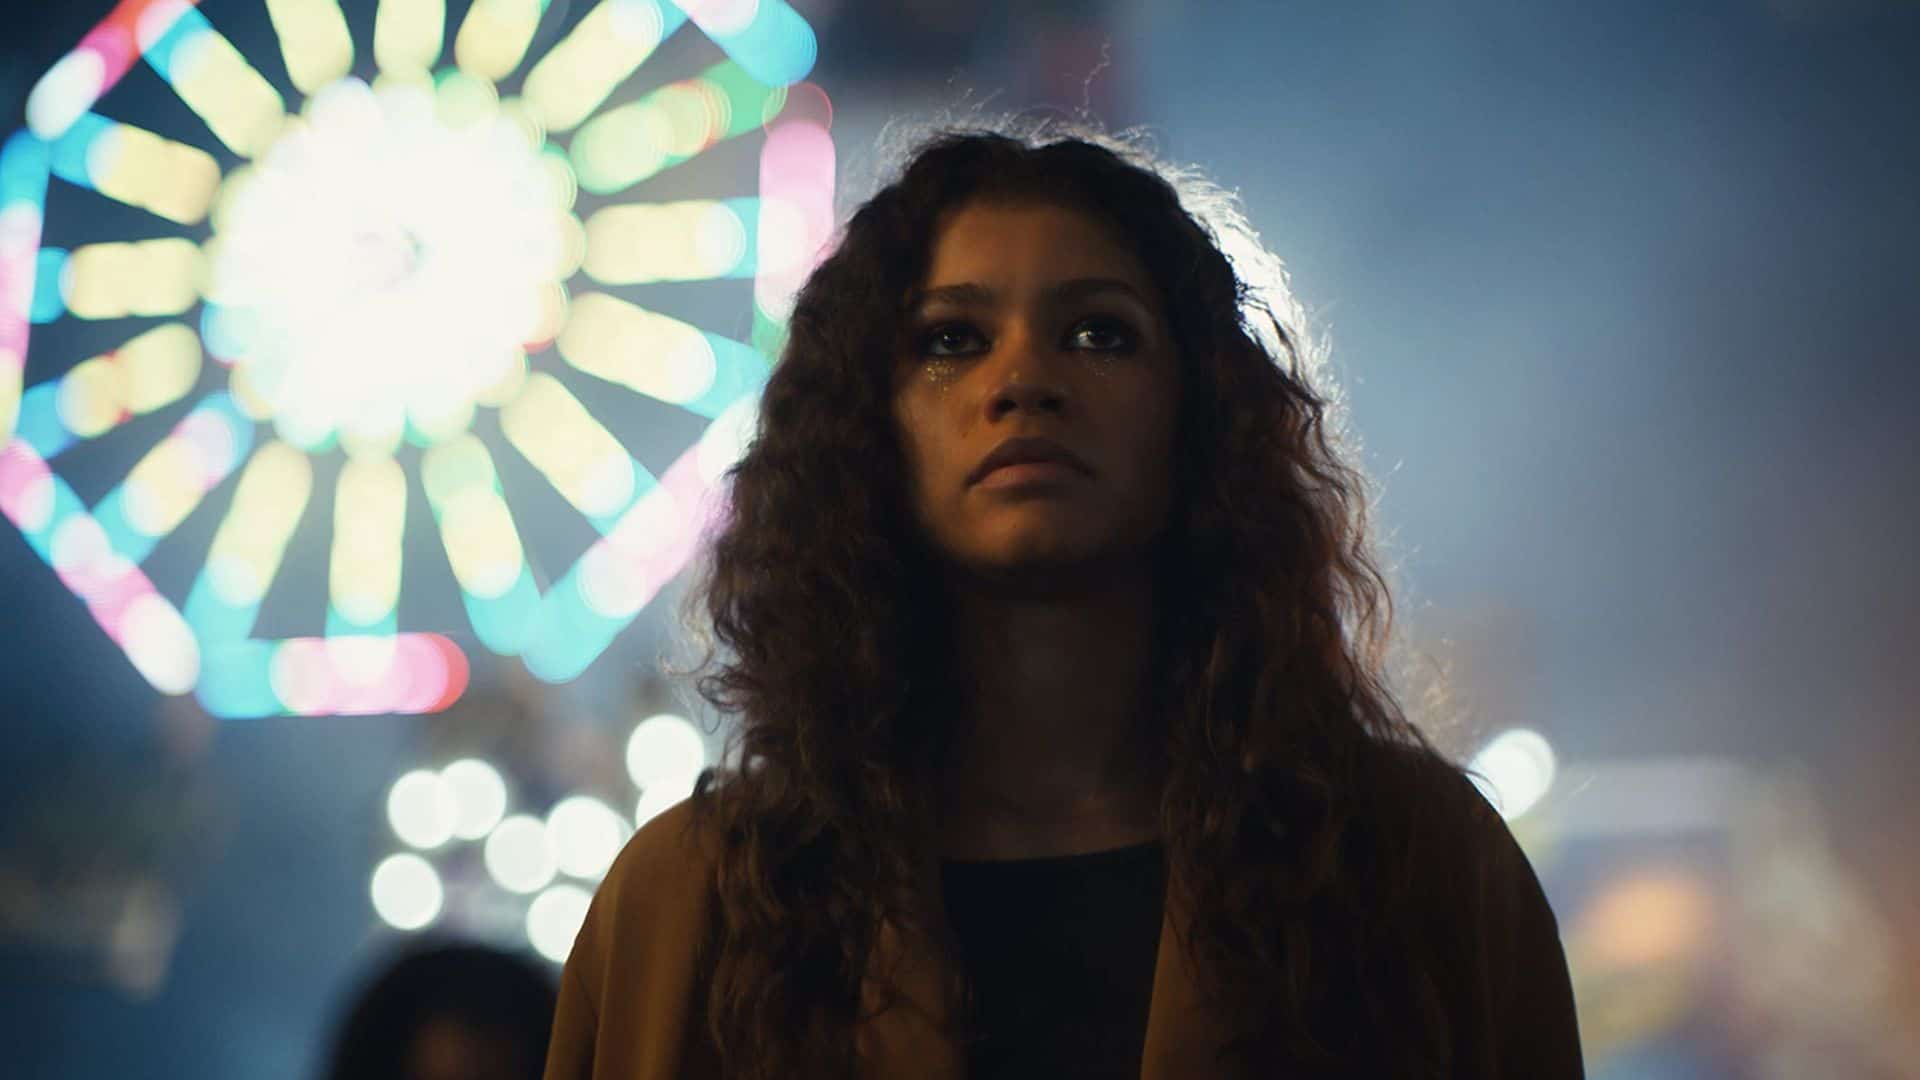 Rue Bennett is standing in front of a Ferris Wheel at night in this image from HBO.